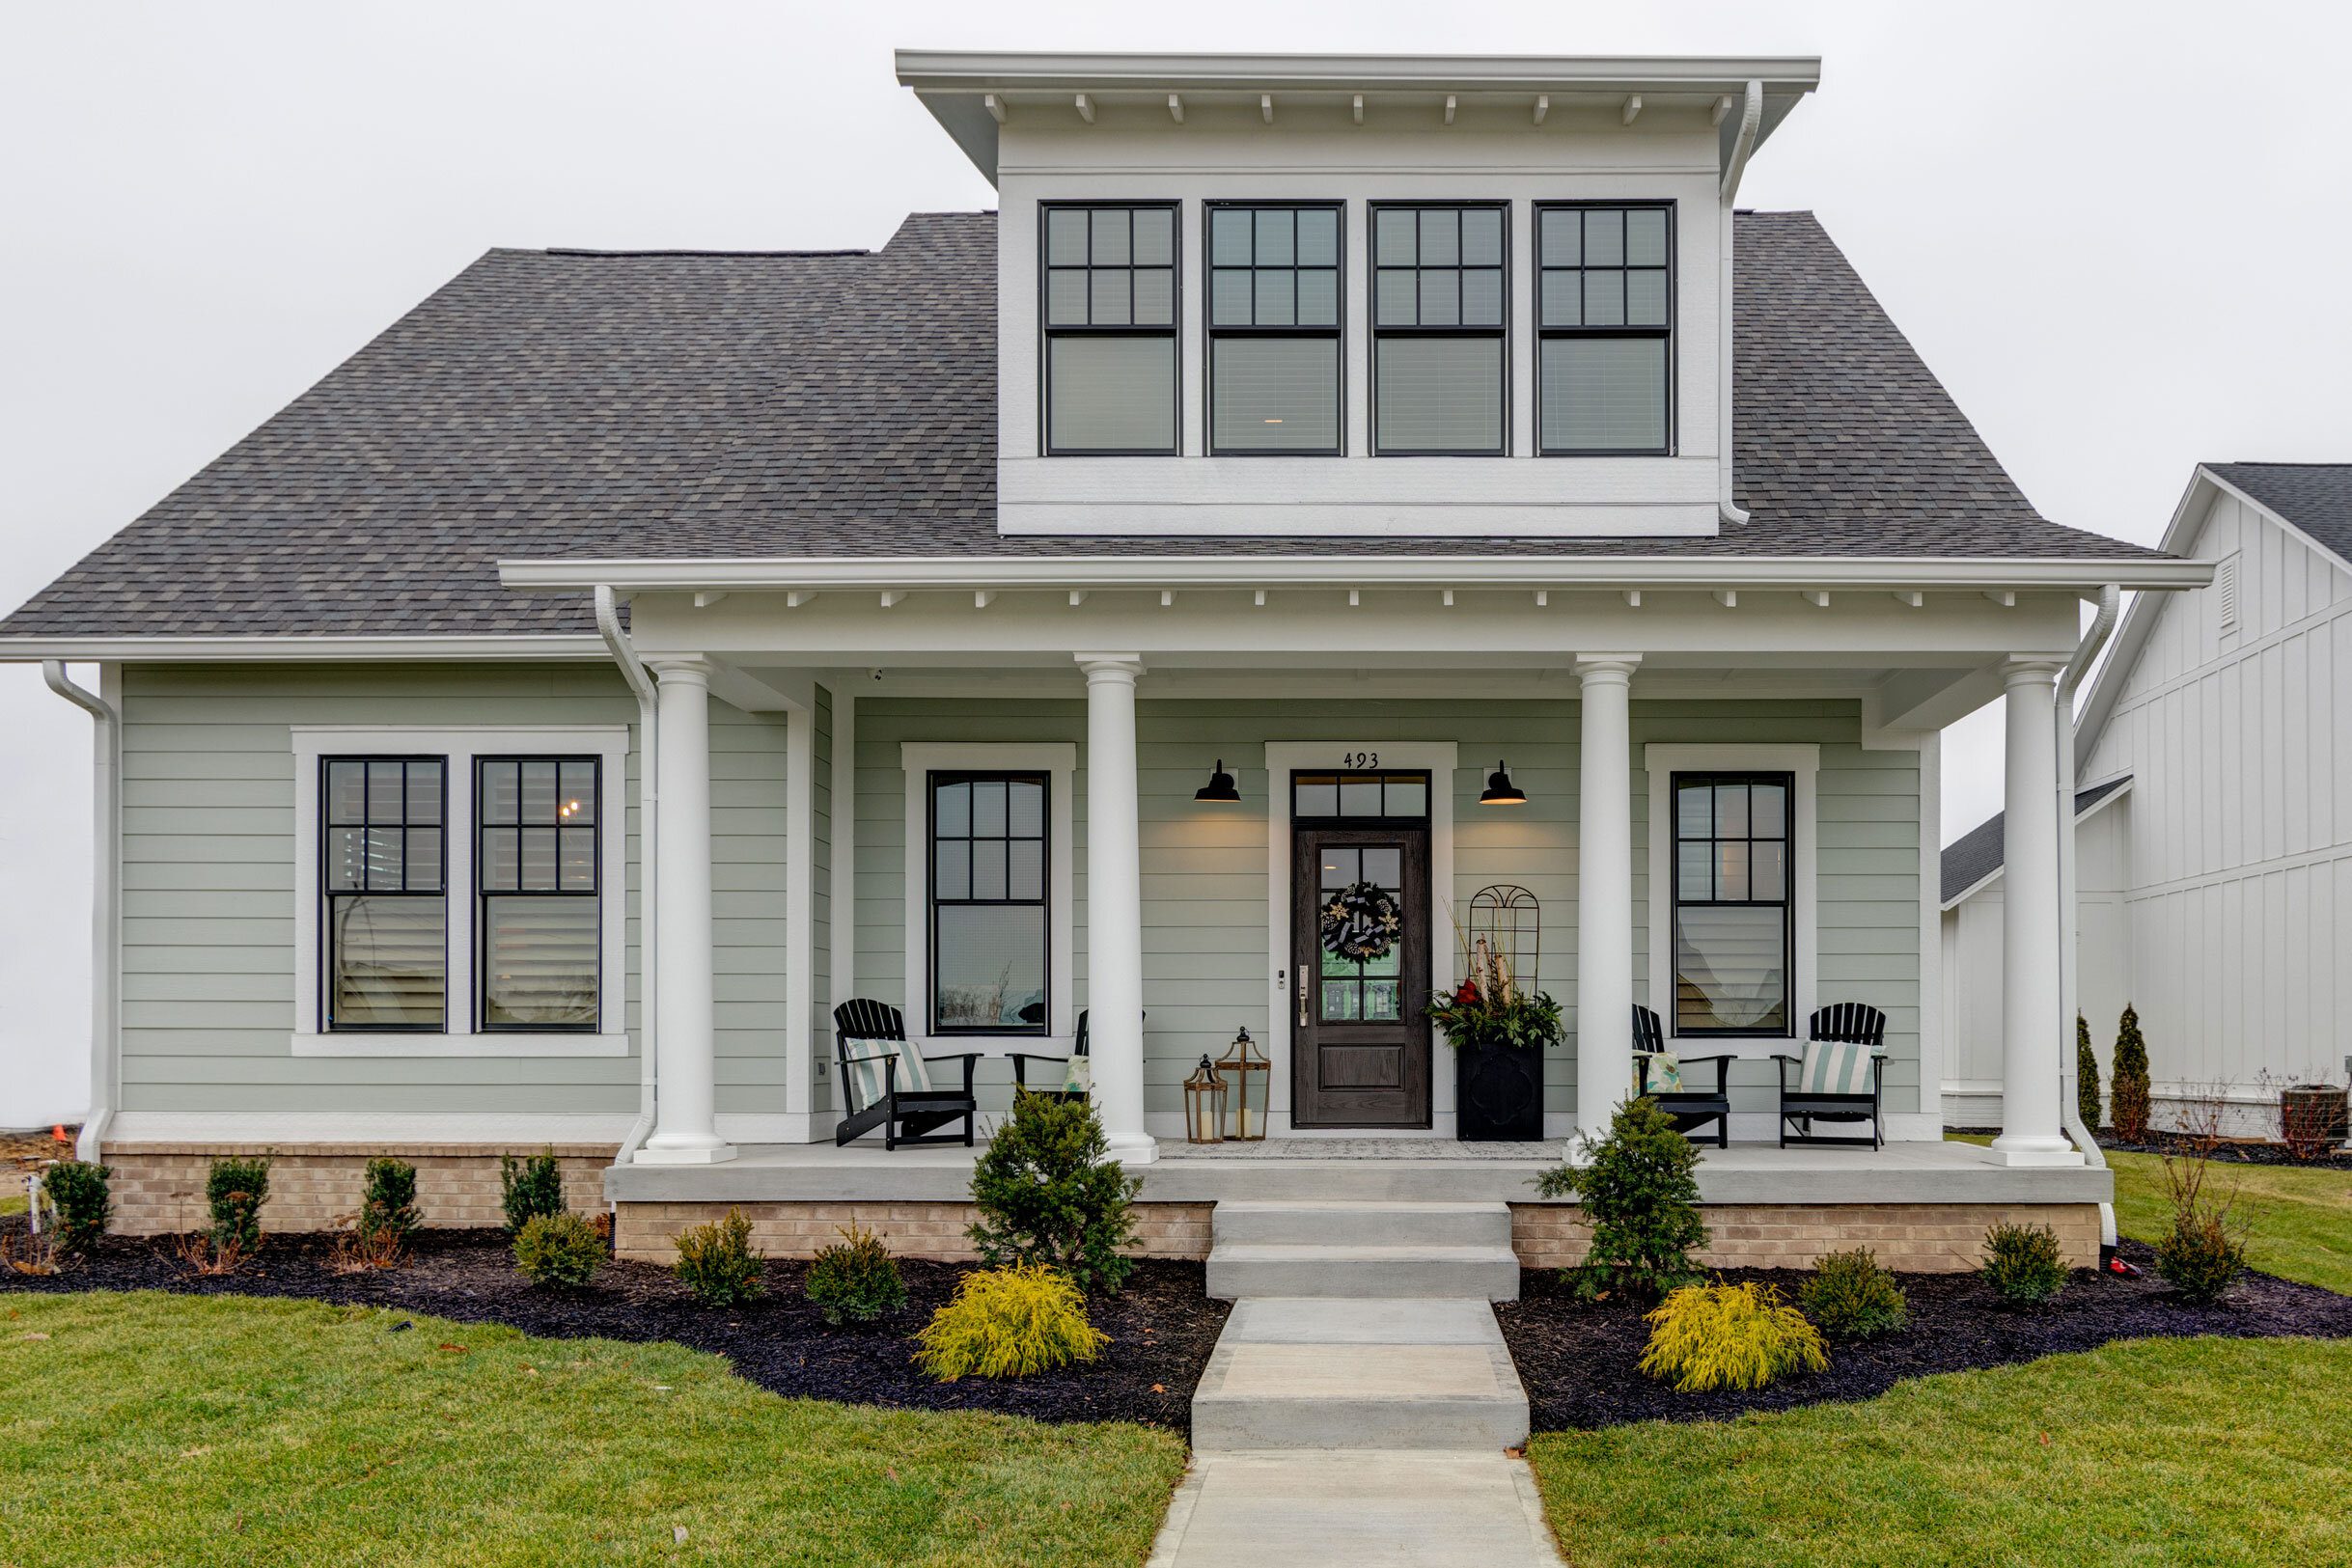 The exterior of a Custom Home Builder Indianapolis Indiana with a porch and porches.